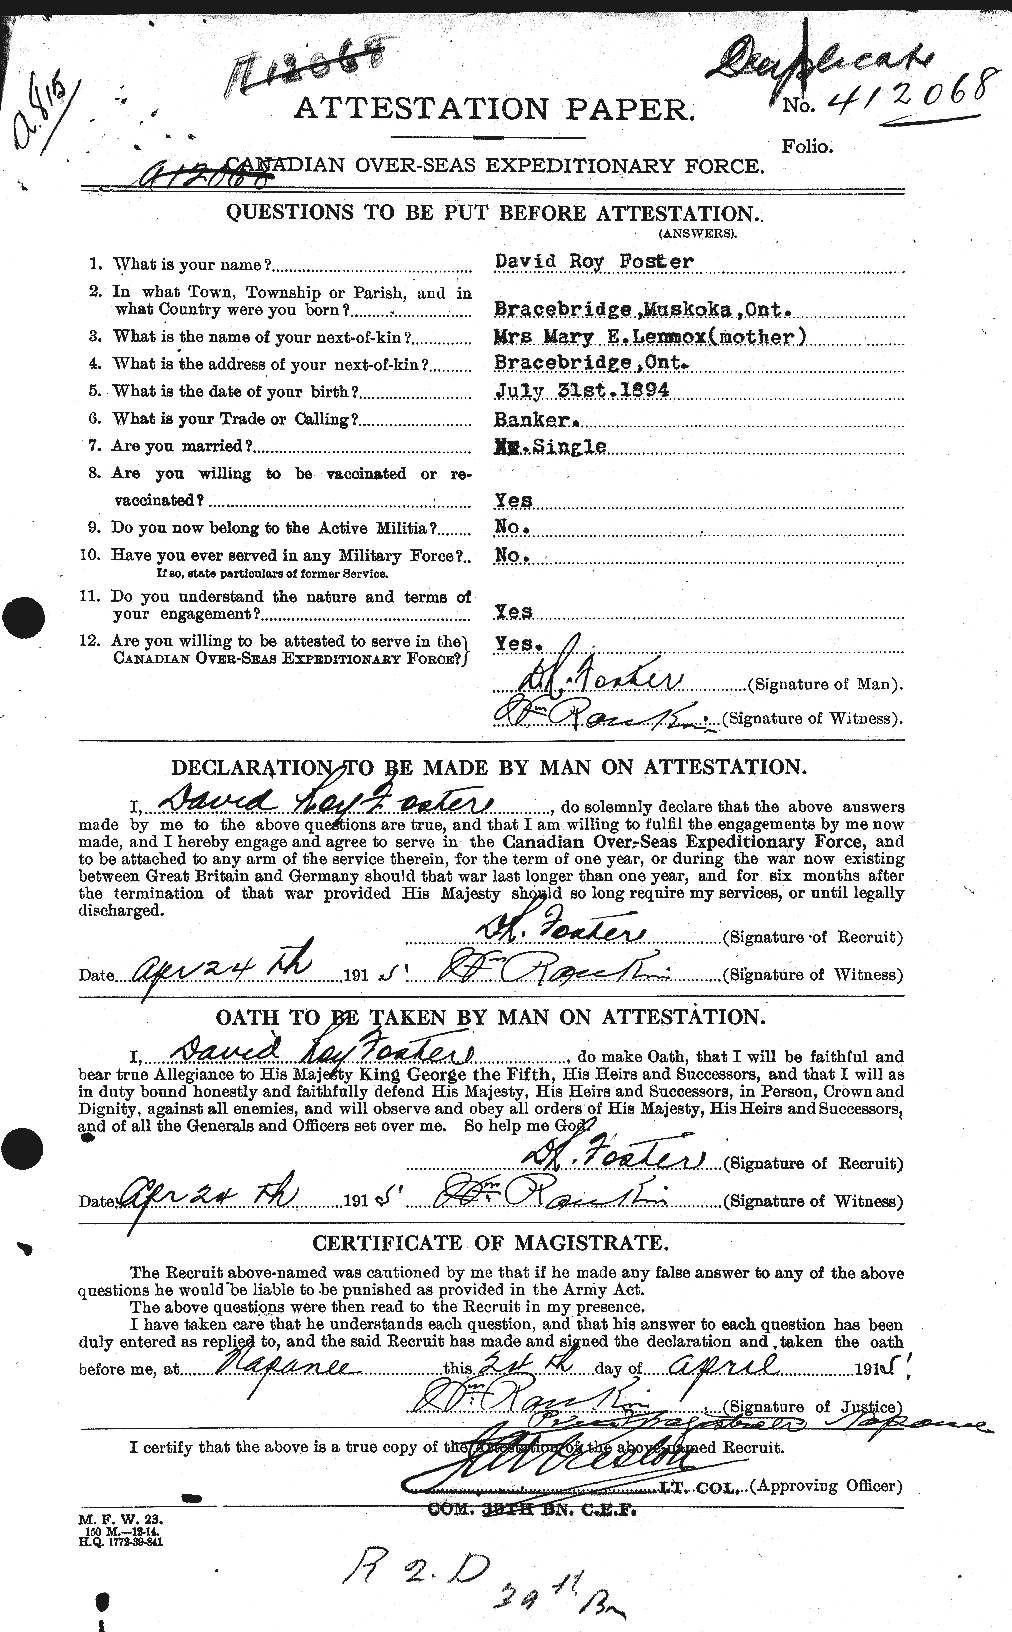 Personnel Records of the First World War - CEF 330560a